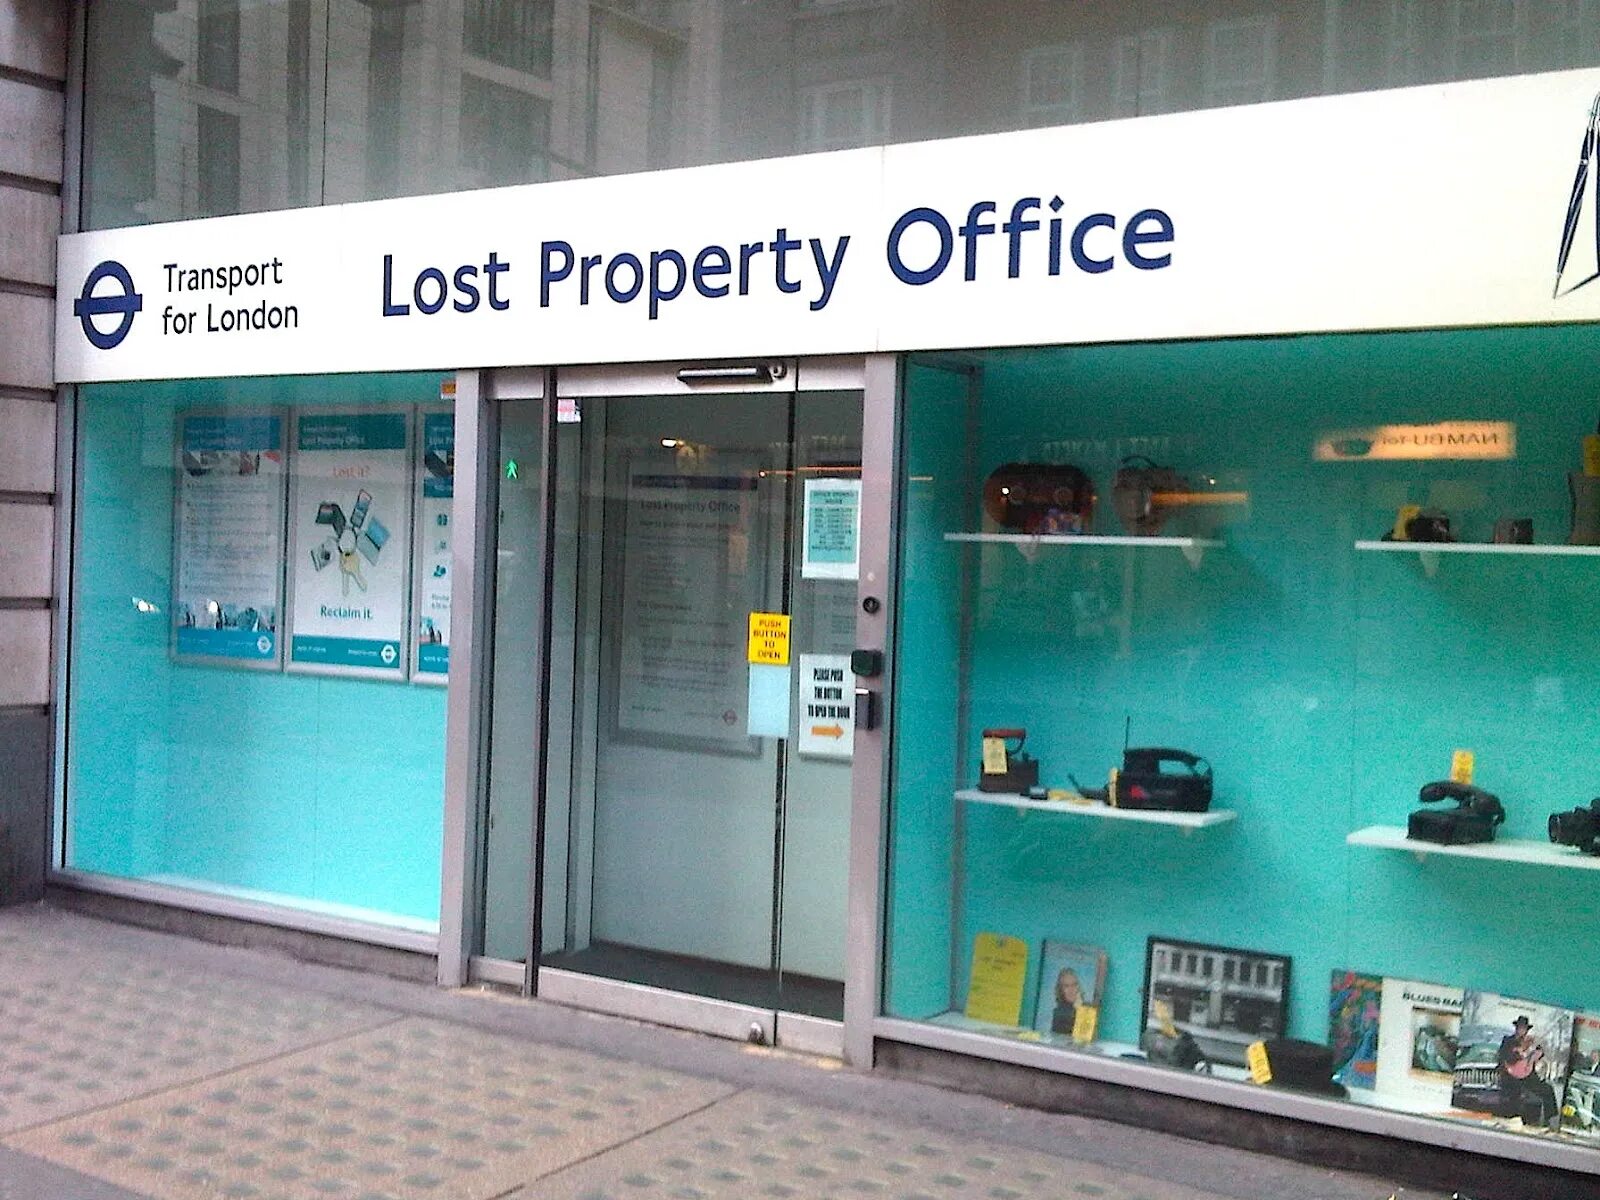 Lost property Office. Lost and found Office. Картинка Lost property. Lost property Spotlight 6 презентация. Lost london